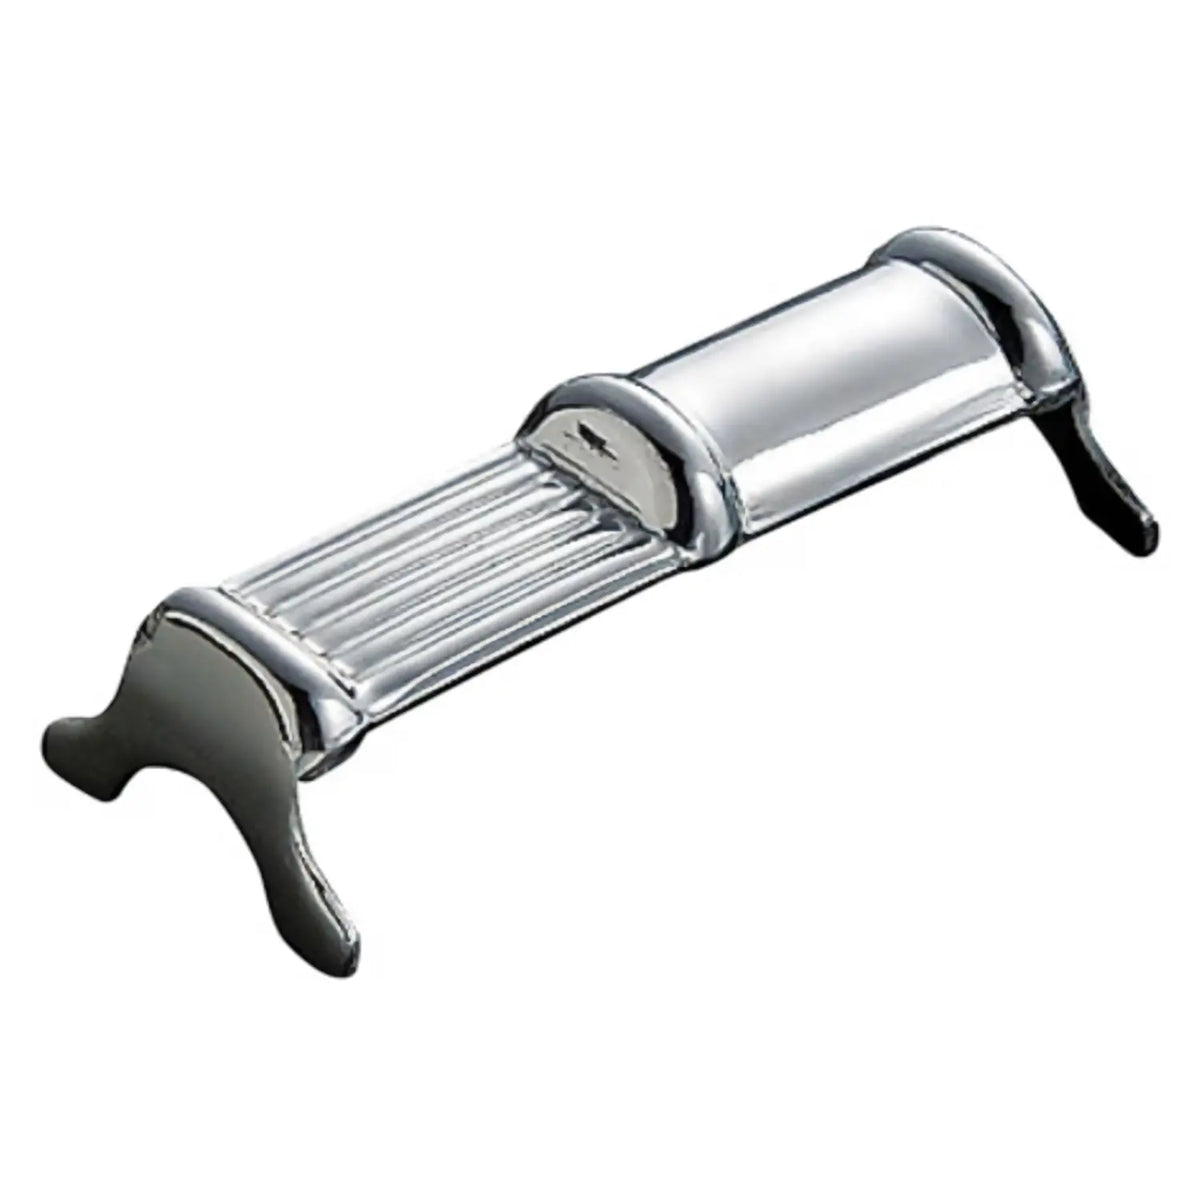 Wada Corporation Stainless Steel Cutlery Rest with Feet